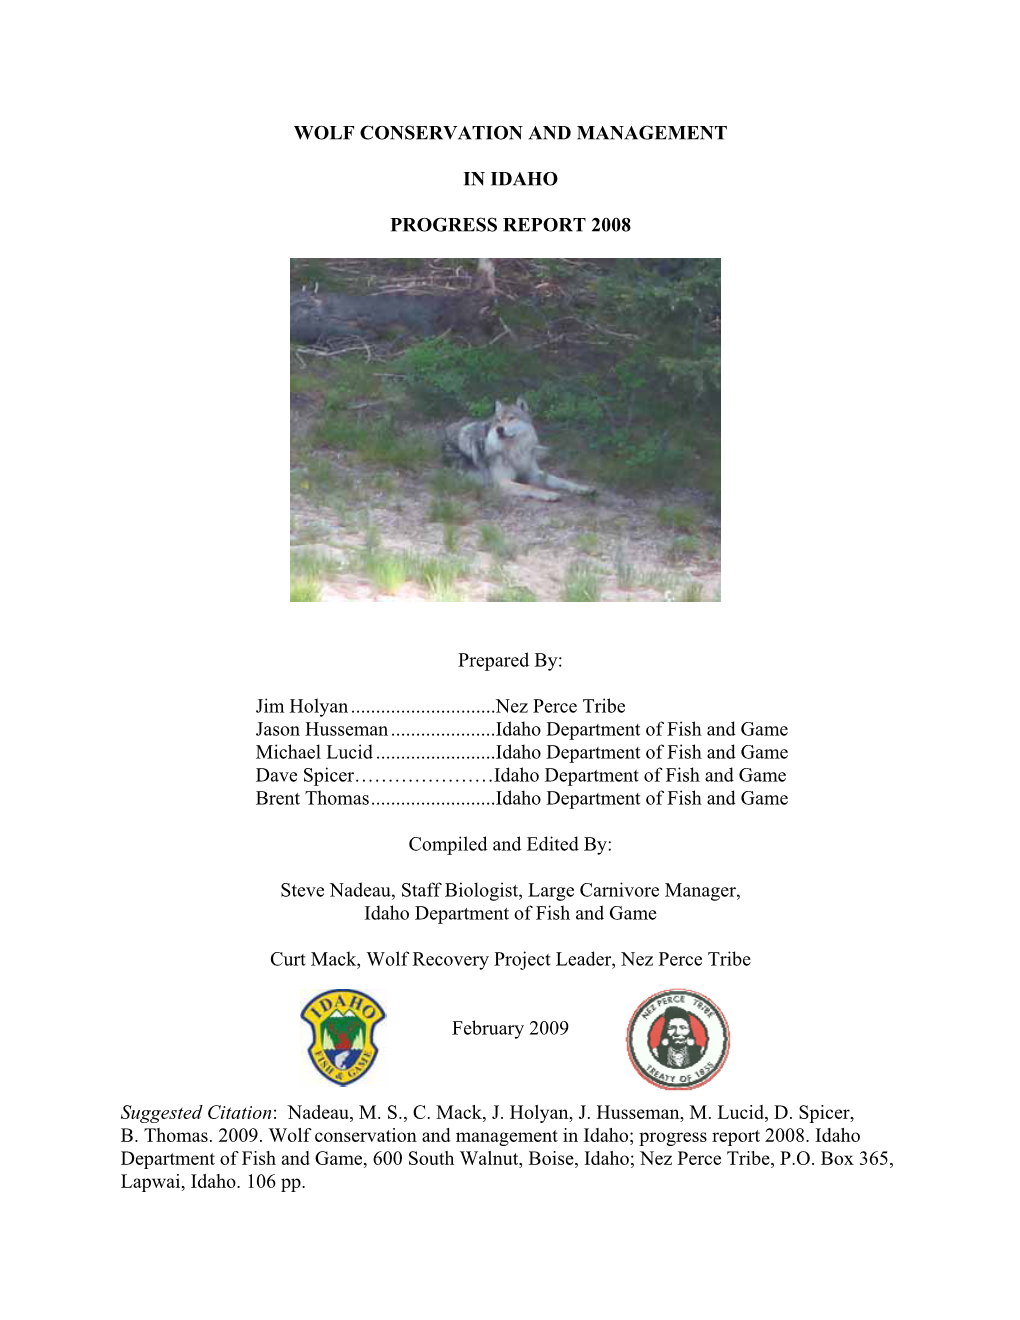 2008 Wolf Conservation and Management Progress Report